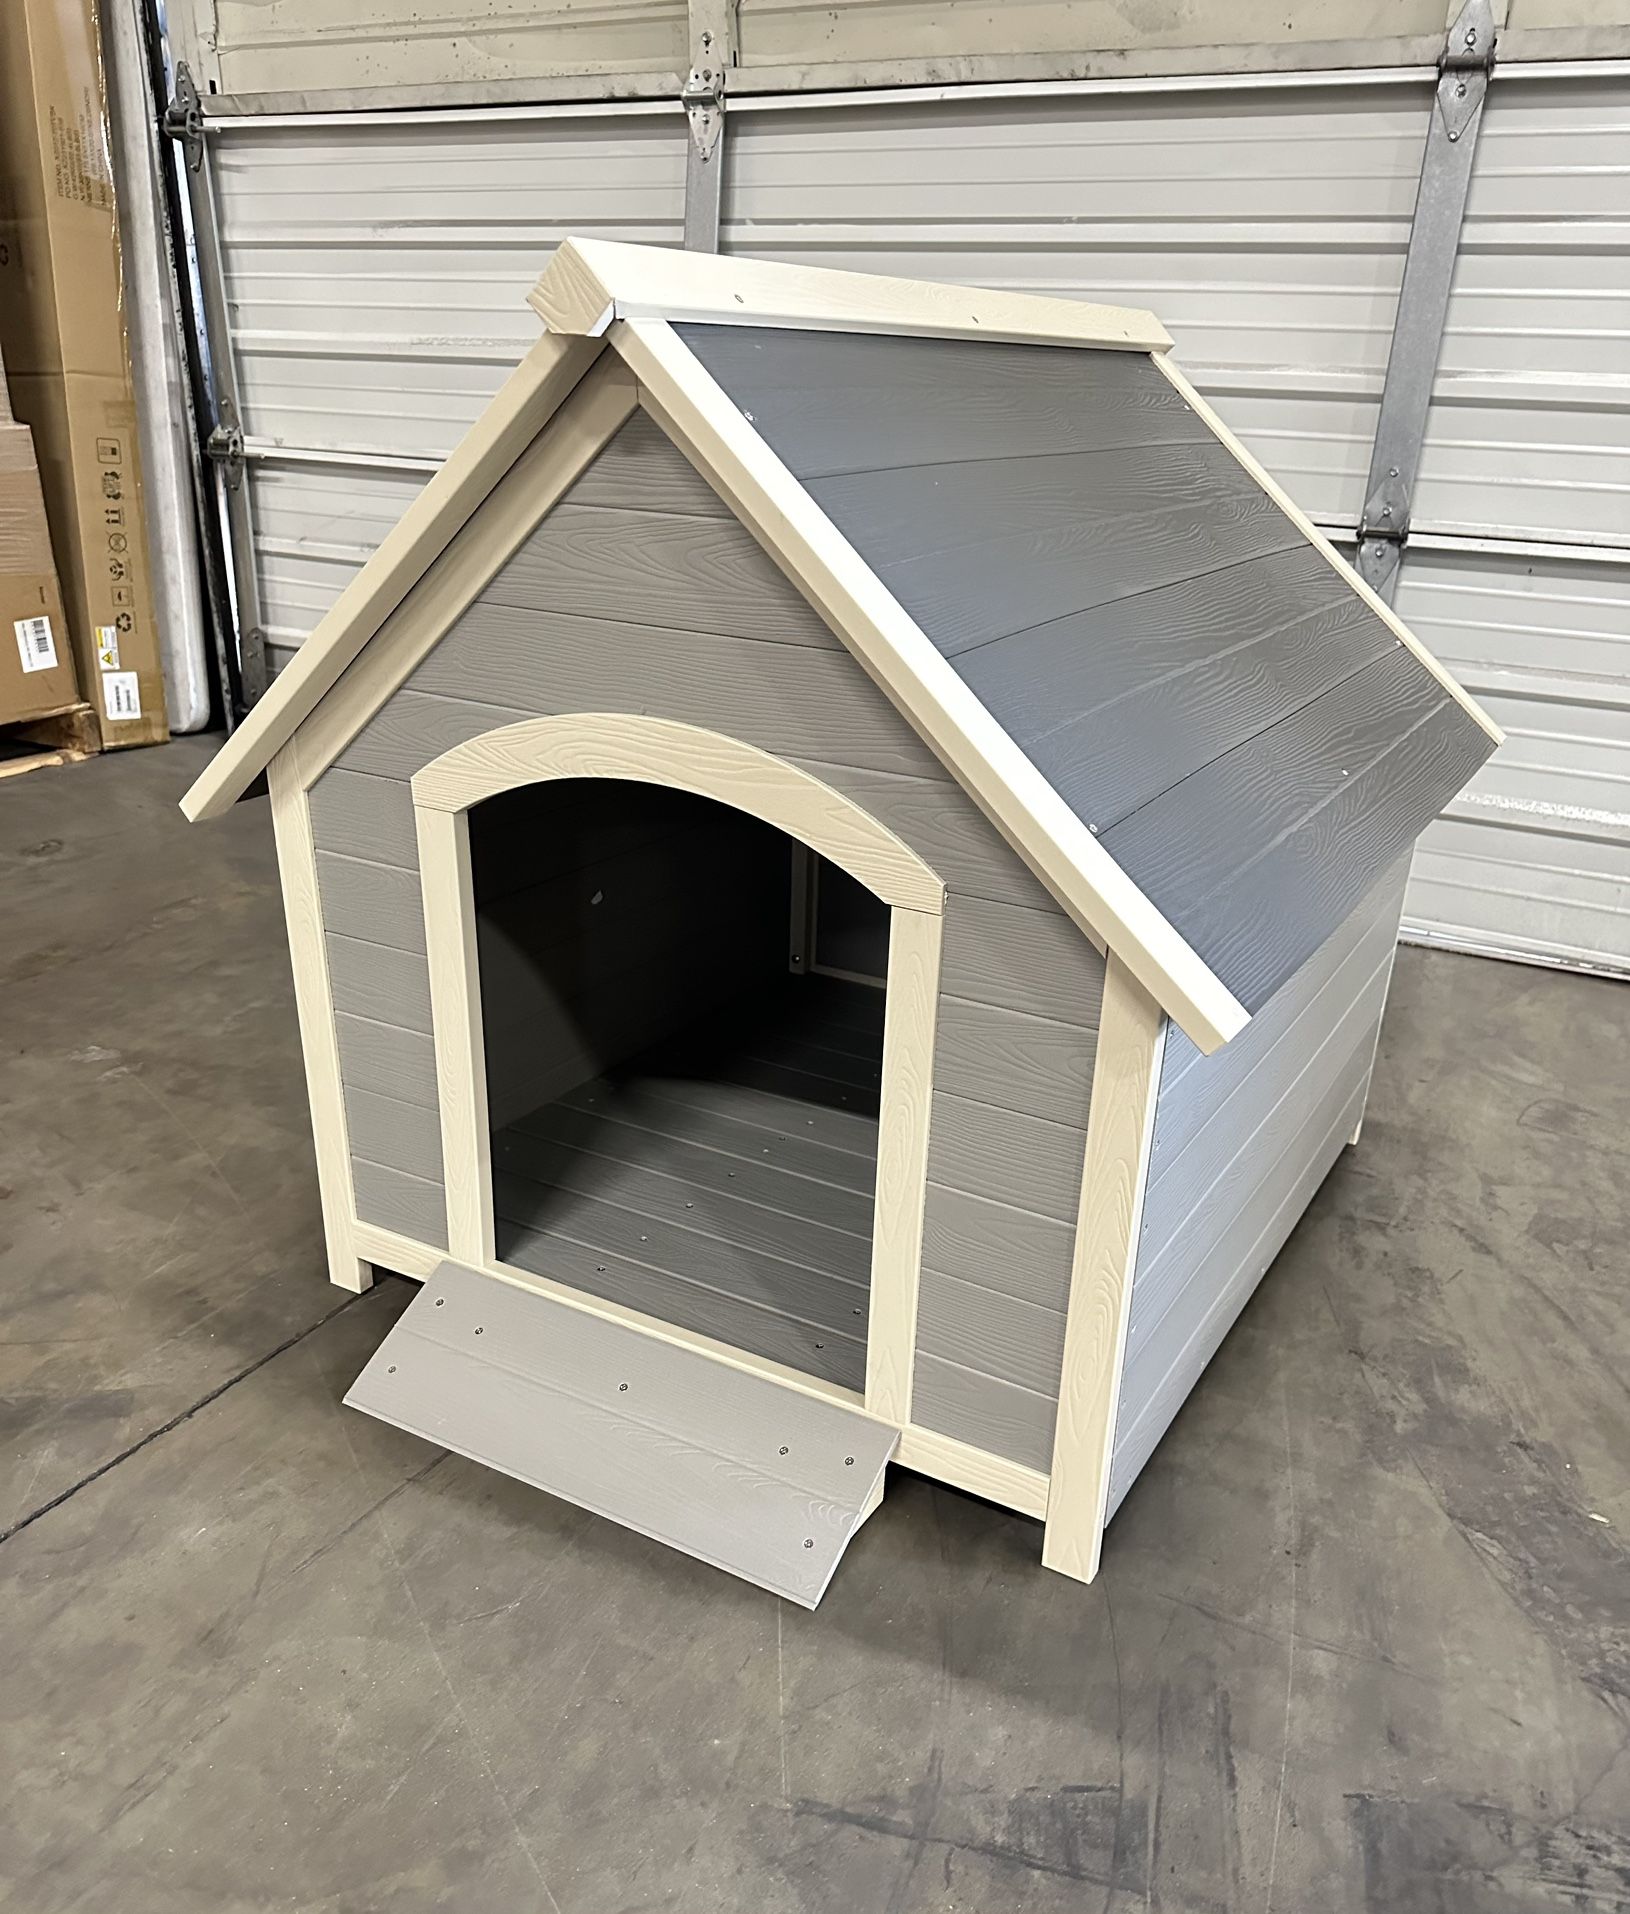 Outdoor Plastic 40.7" Large HDPS Dog House Red Dog Crate 